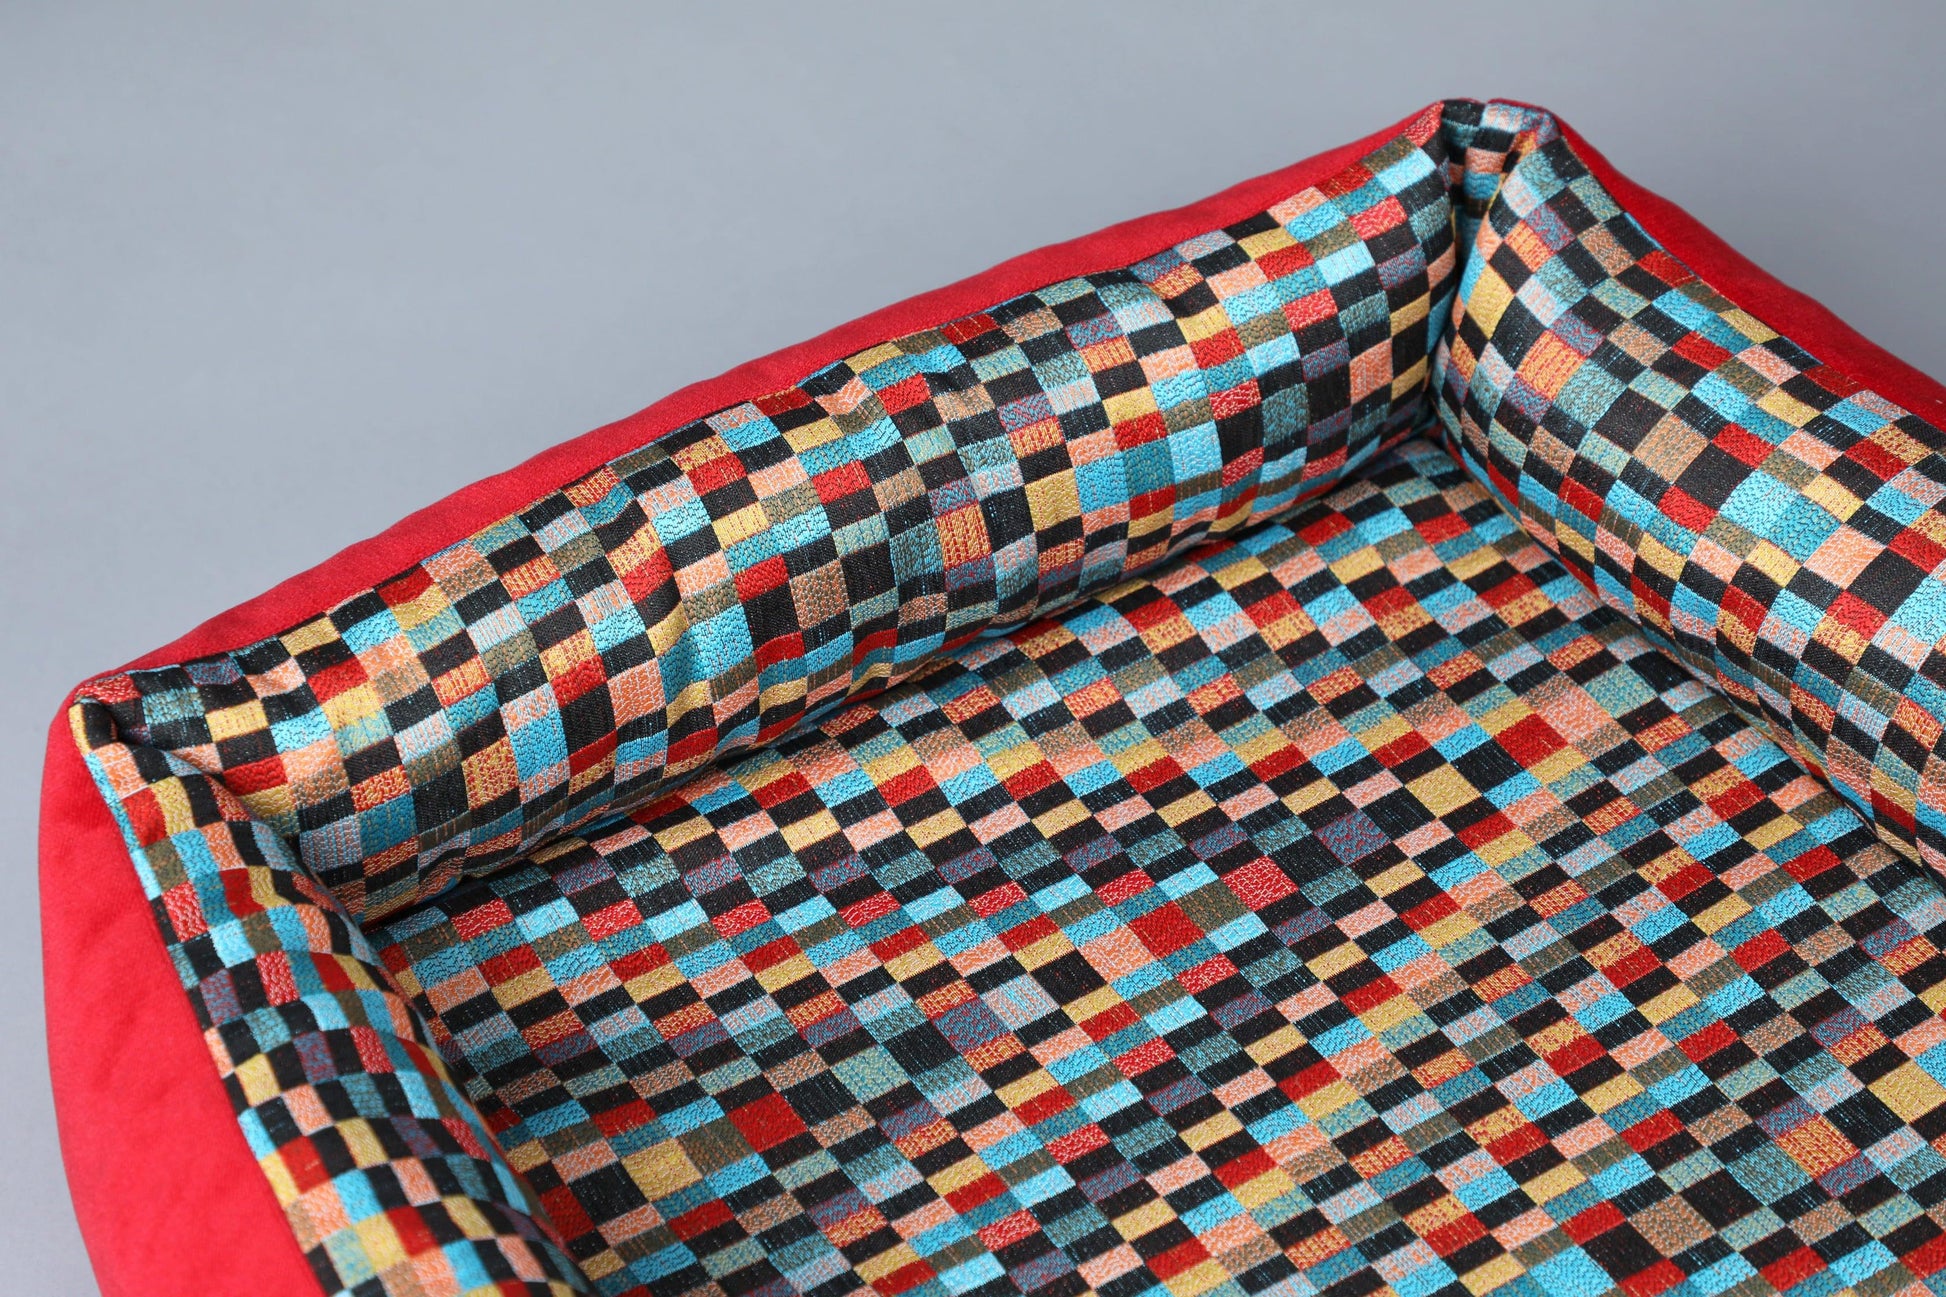 2-sided modern style dog bed. CHECKERED RED - European handmade dog accessories by My Wild Other